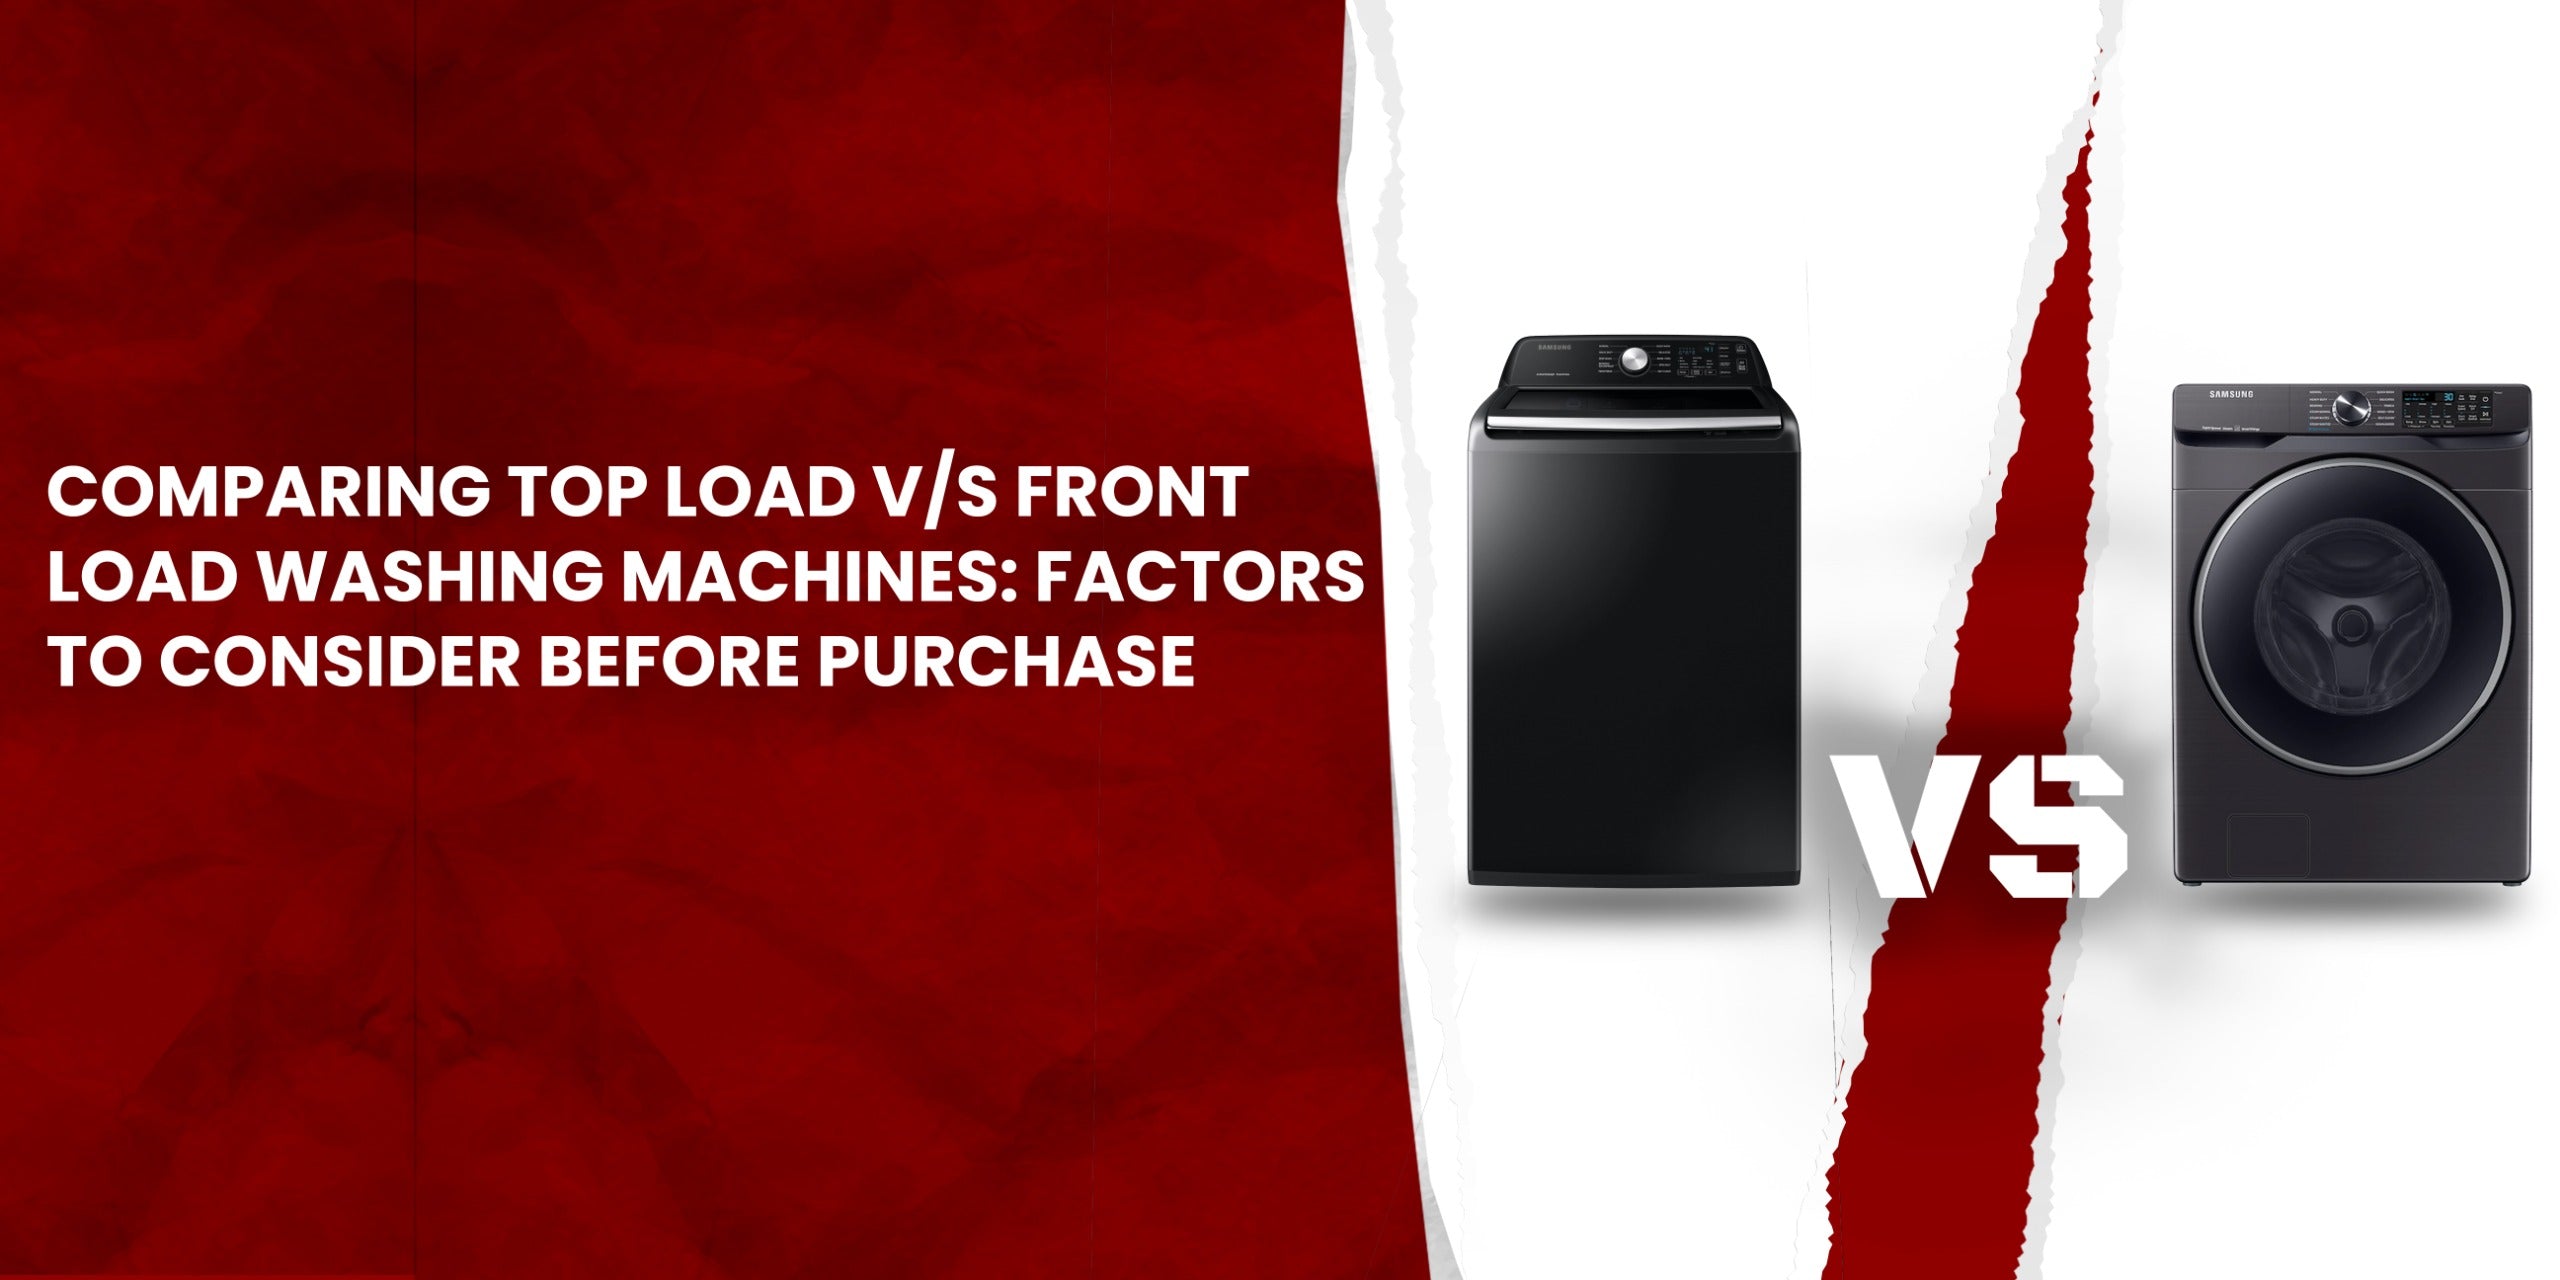 Comparing Top Load V/s Front Load Washing Machines: Factors to Consider Before Purchase